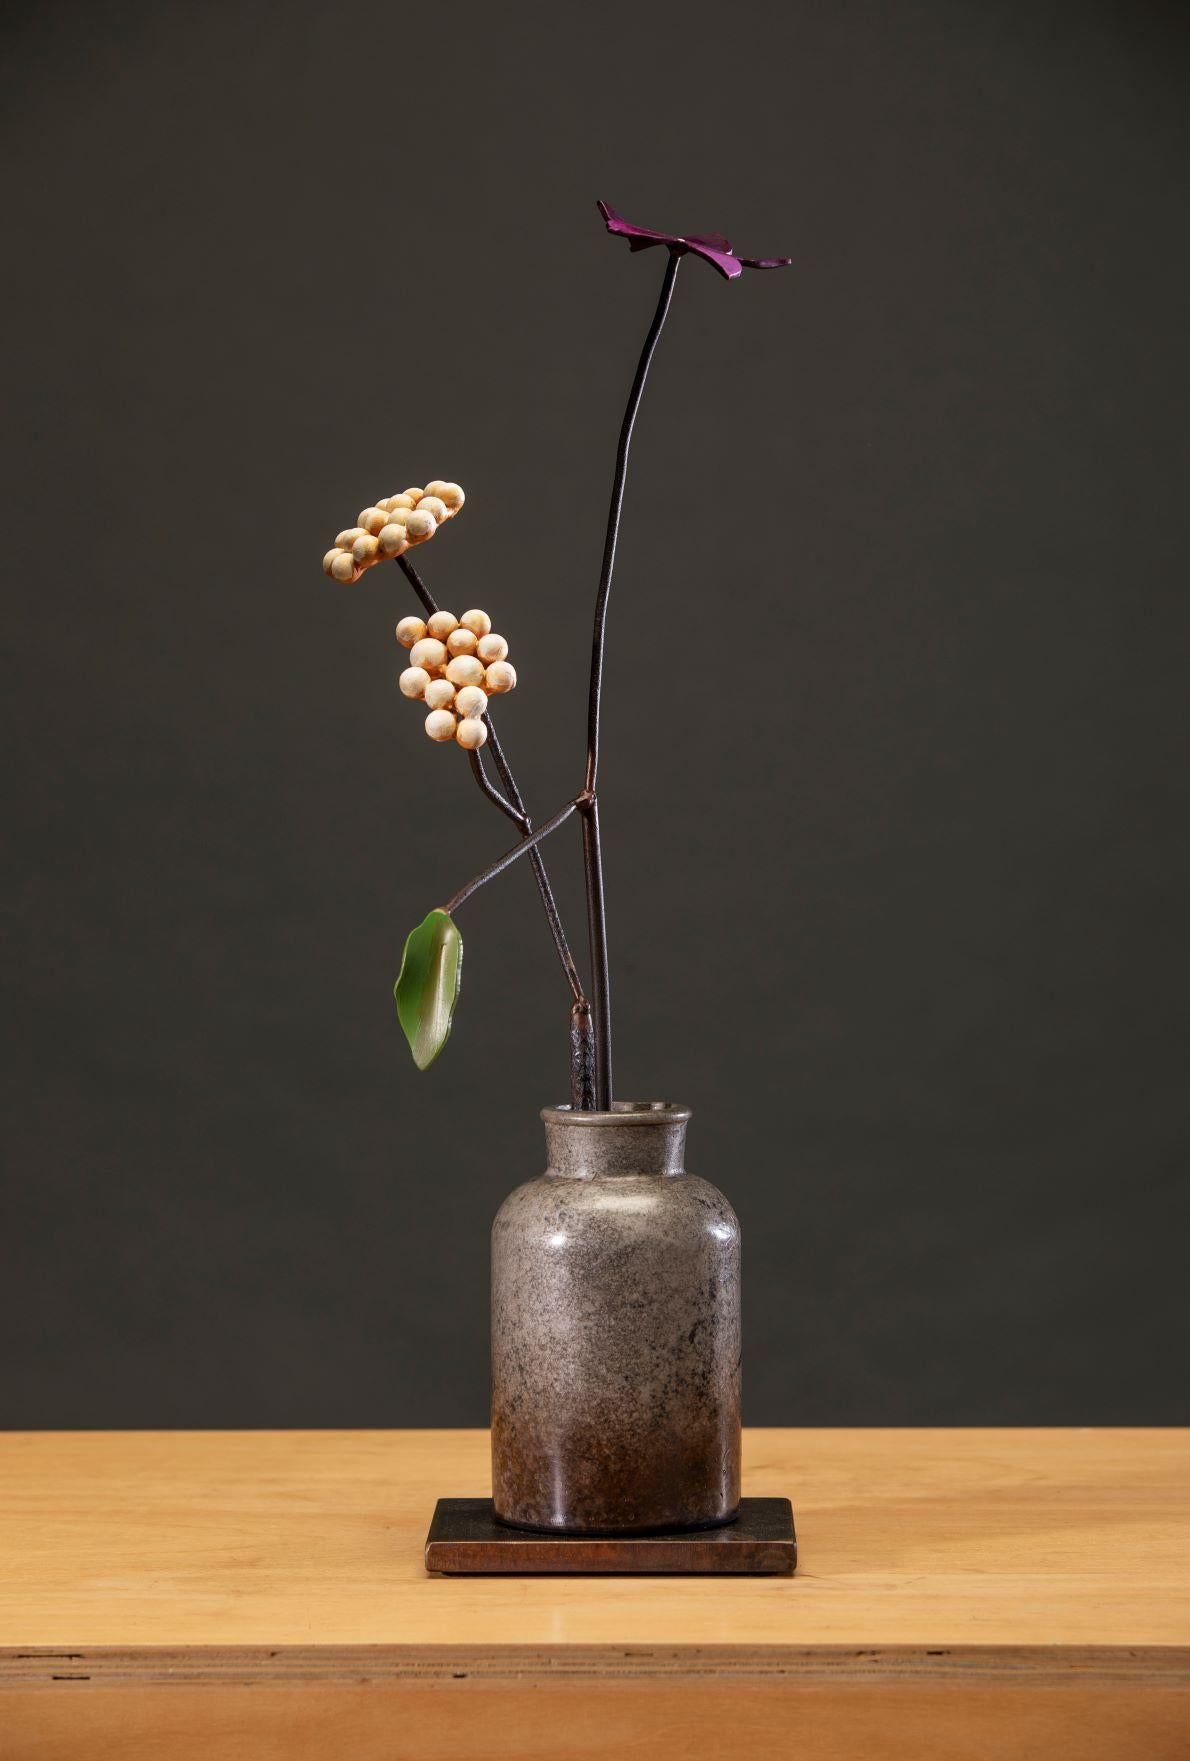 'Yarrow in a Dutch Jar' by David Kimball Anderson, 2022. Bronze, steel, and paint, 23 x 7 x 7 in. This sculpture features a round, cylinder vase cast in bronze and finished with a grey patina. It features a steel flower painted in purple with two